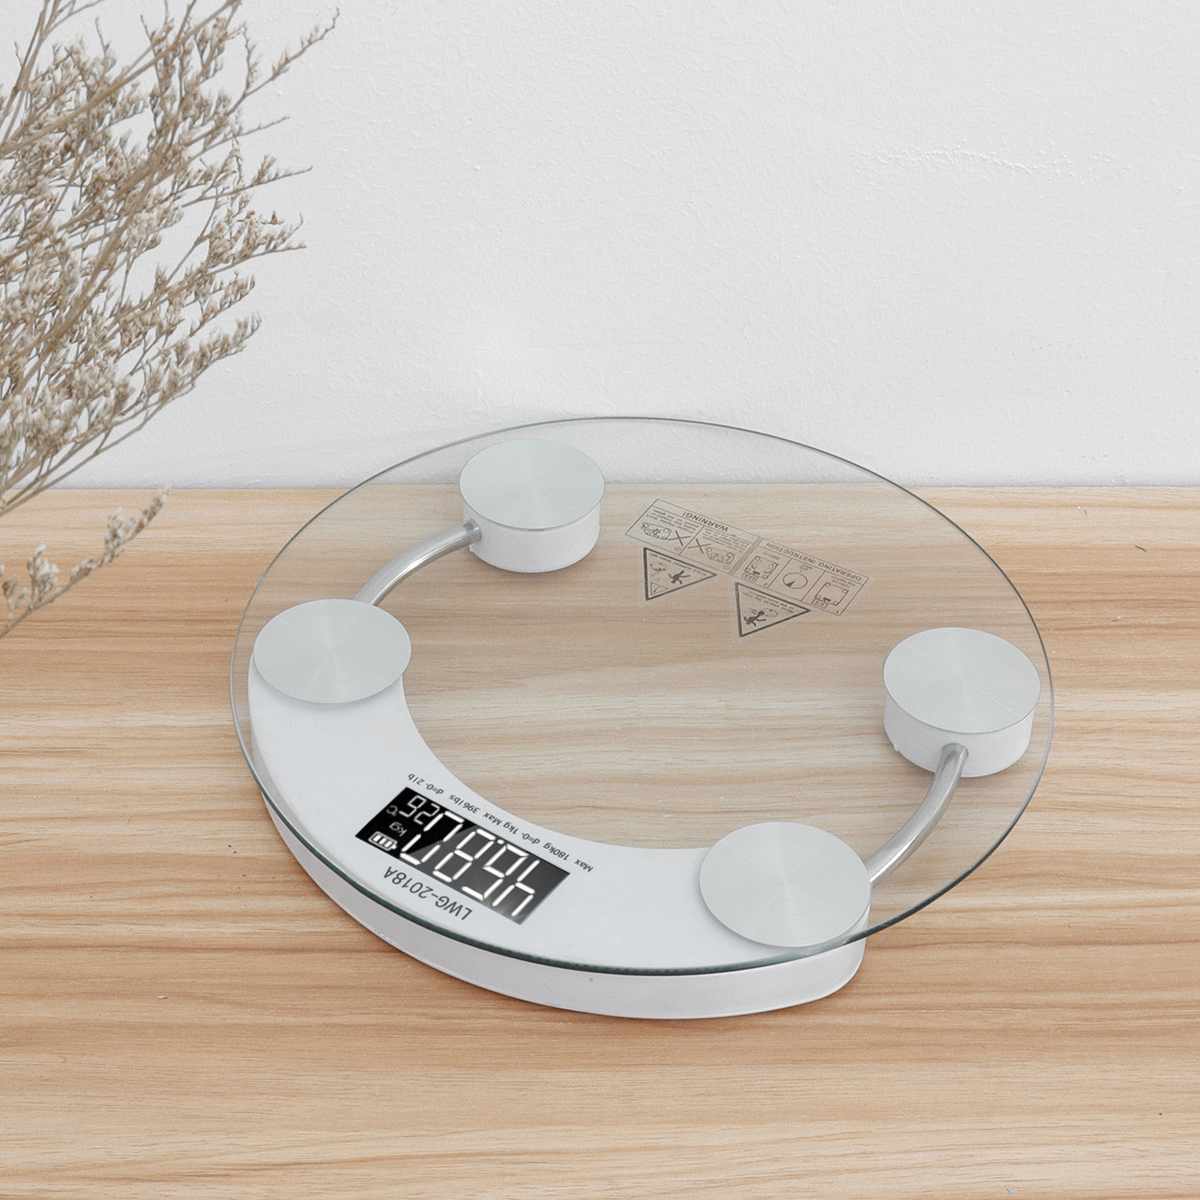 180KG Toughened Glass Electroni Digital Body Scales Bathroom Gym Smart Scales LCD Display Body Weighing Digital Weight Scale